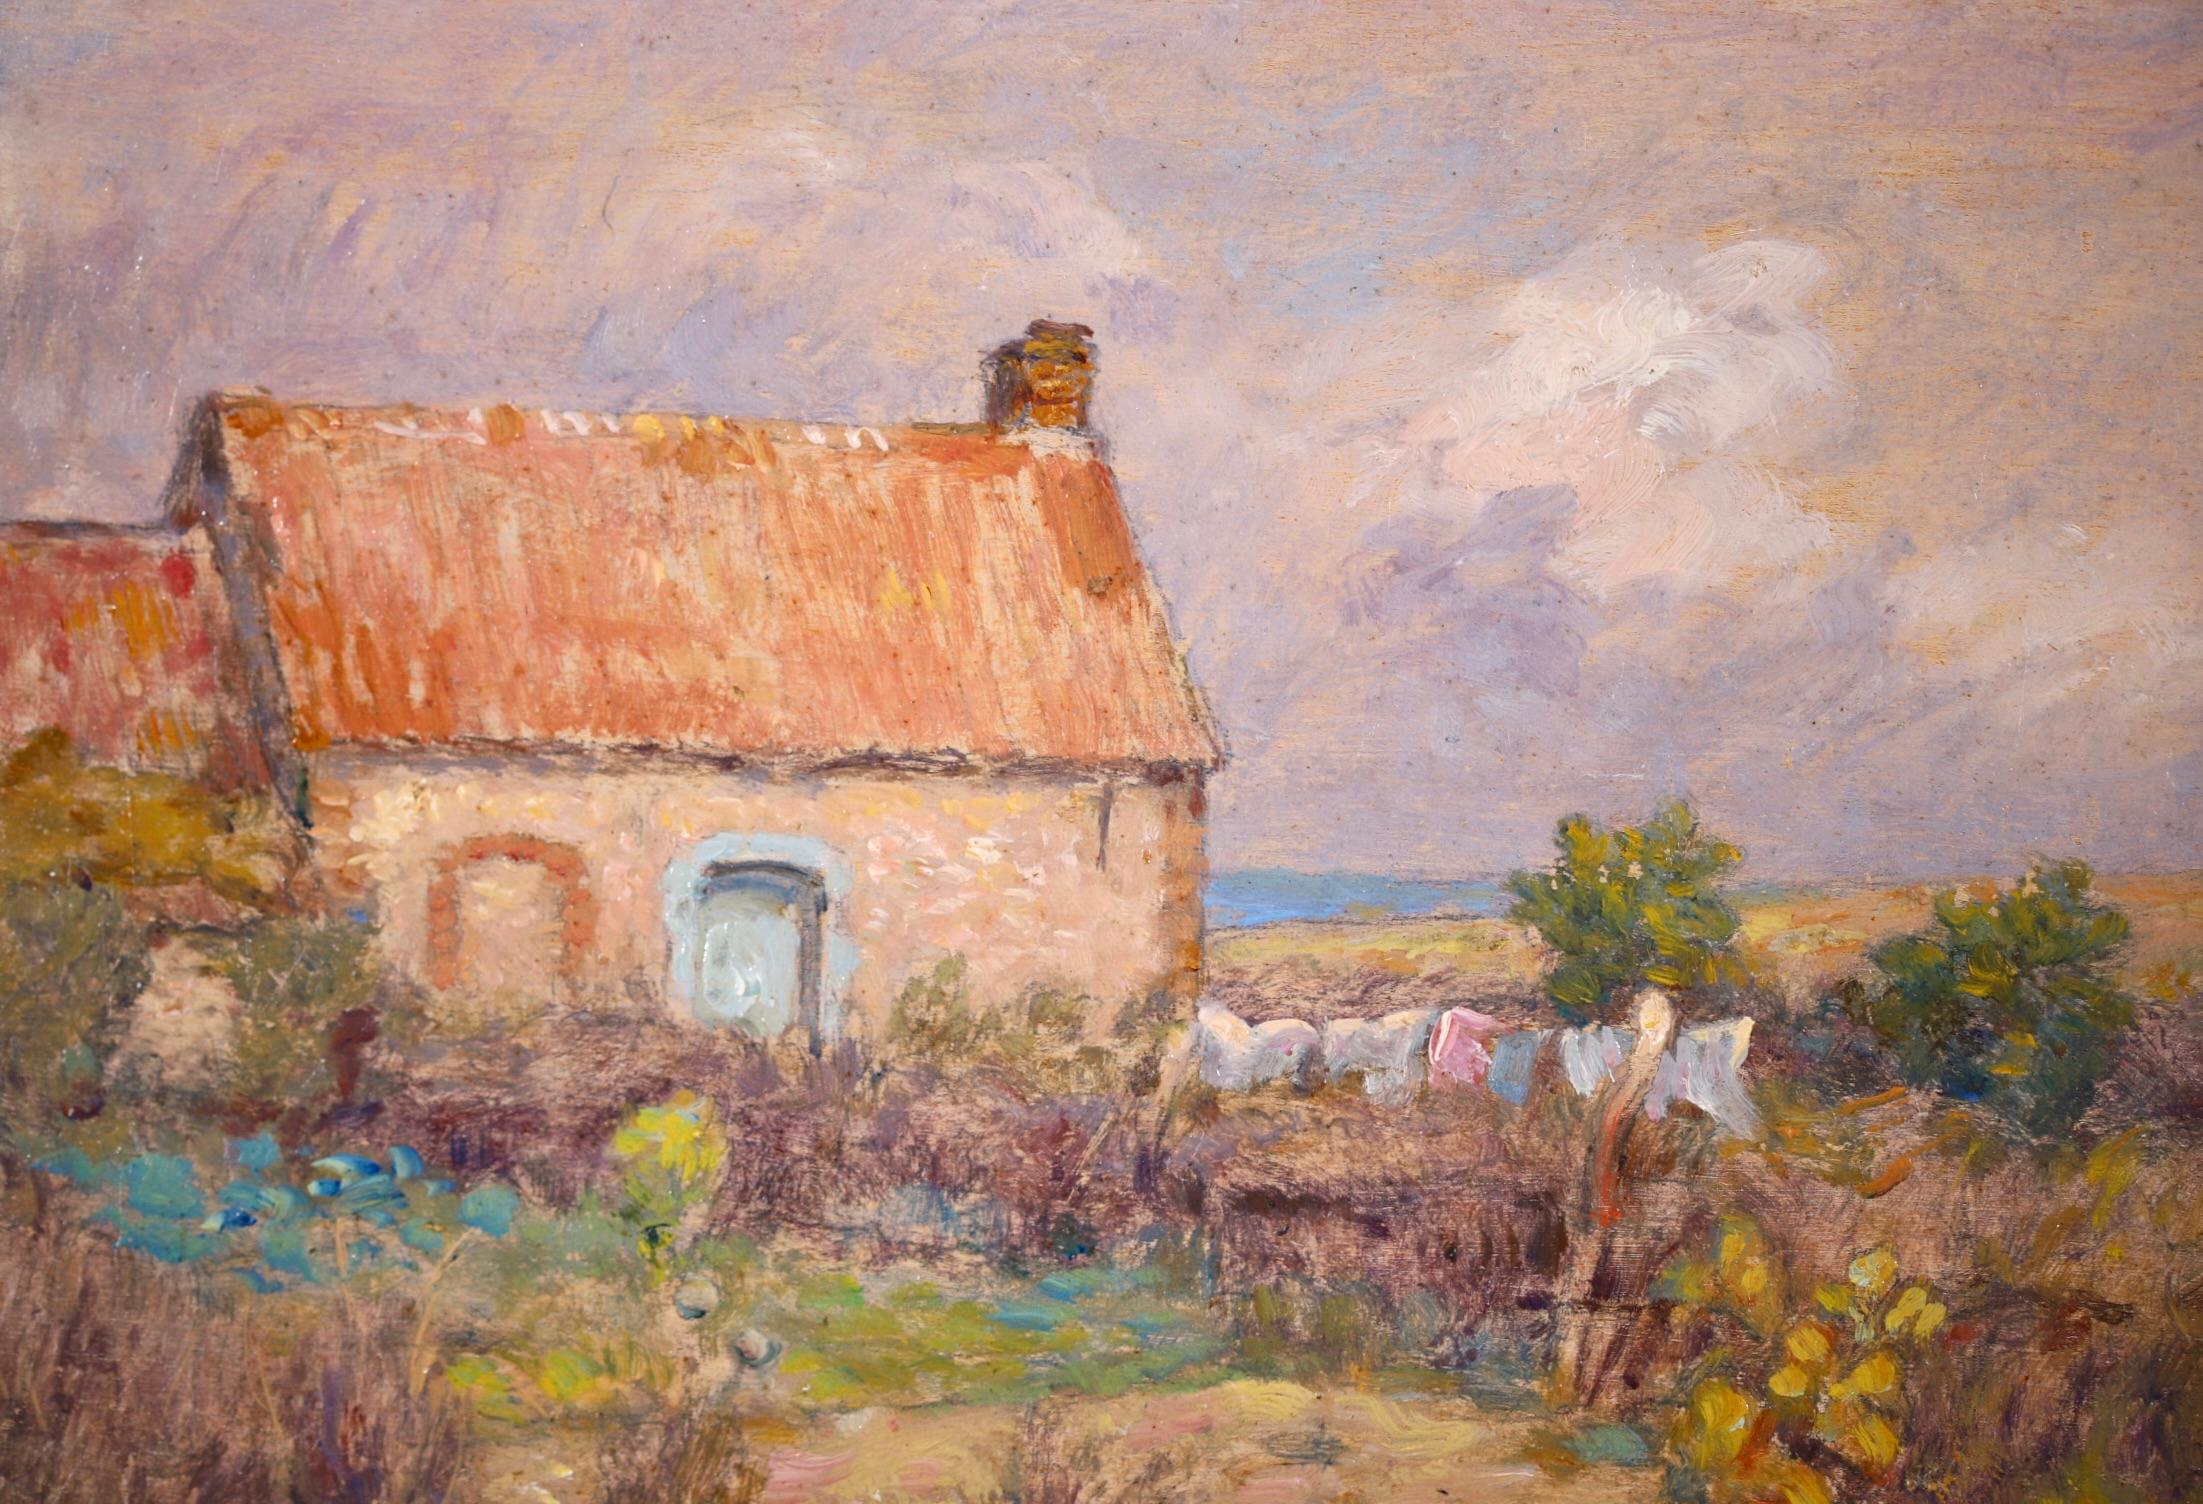 Drying Washing - French Impressionist Oil, Cottage in Landscape by Marie Duhem 2